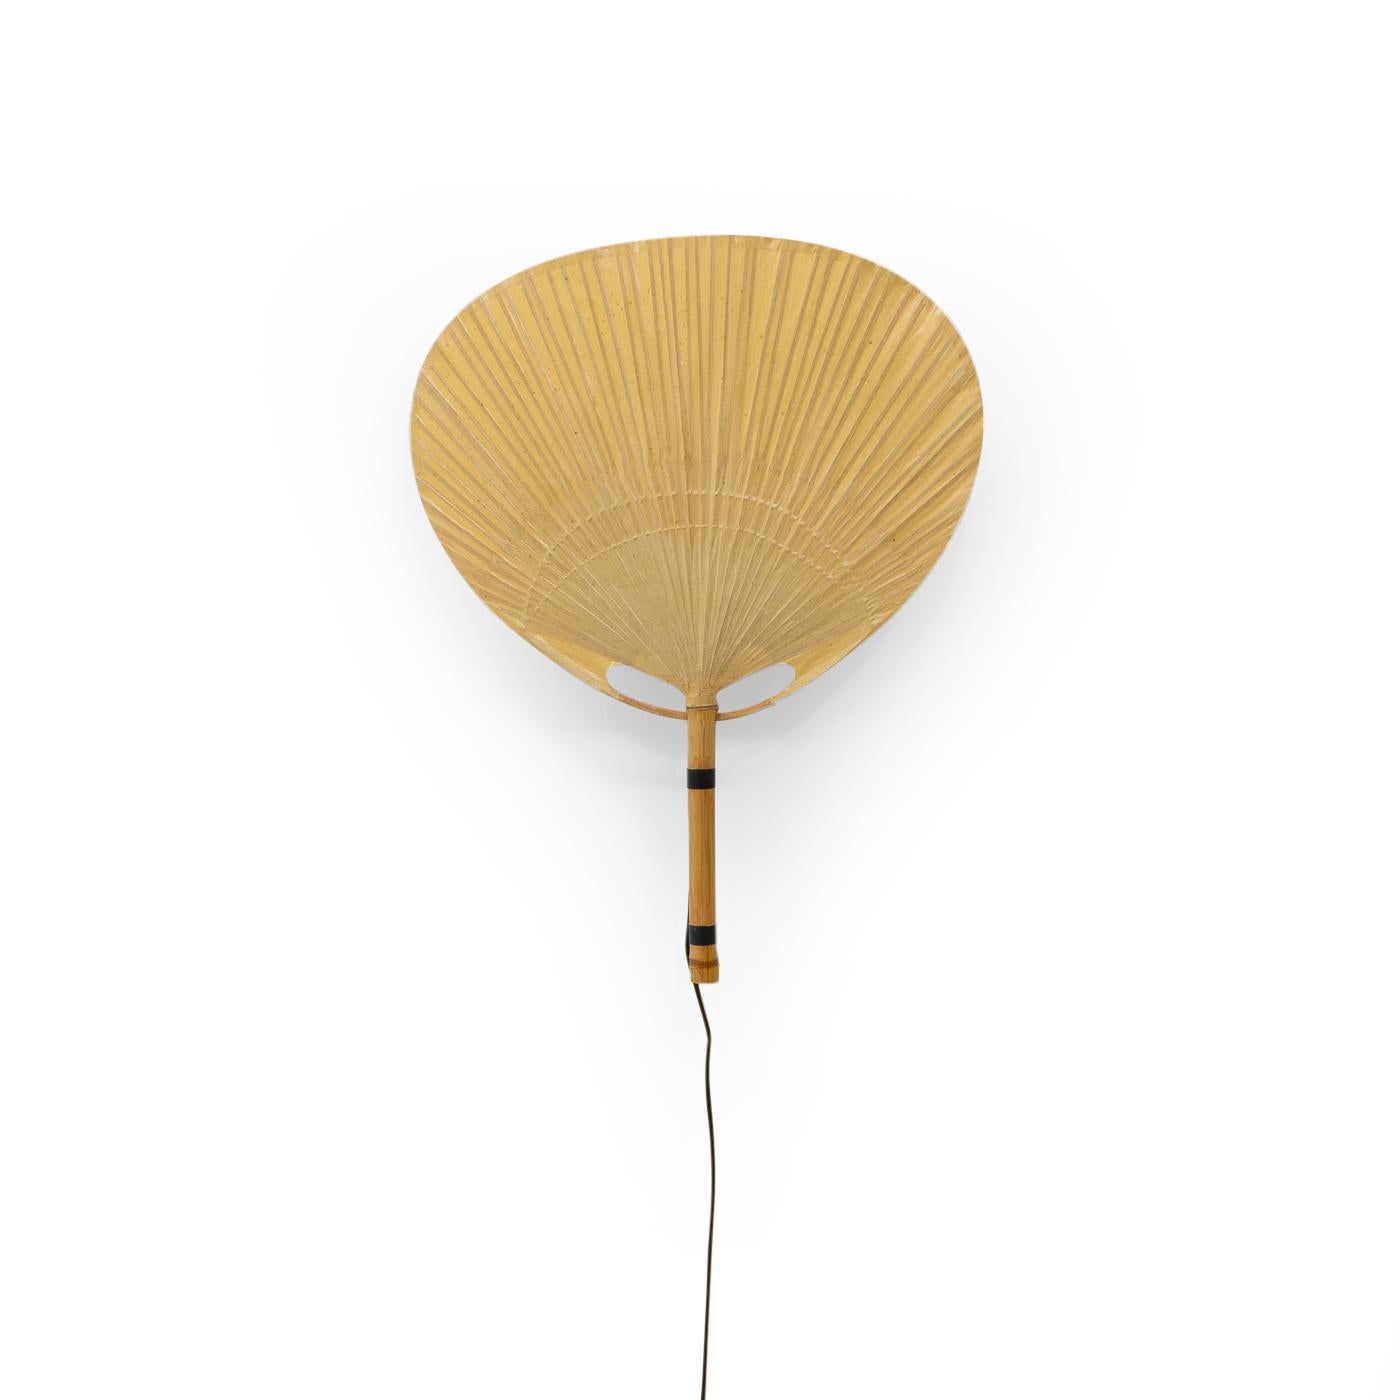 An Uchiwa wall lamp by Ingo Maurer produced by his company Design M during the late 1970s in Germany.


Uchiwa lamps are made from rice paper supported by a bamboo stem; their frail structure gives them a beautiful simplistic and pure appearance.